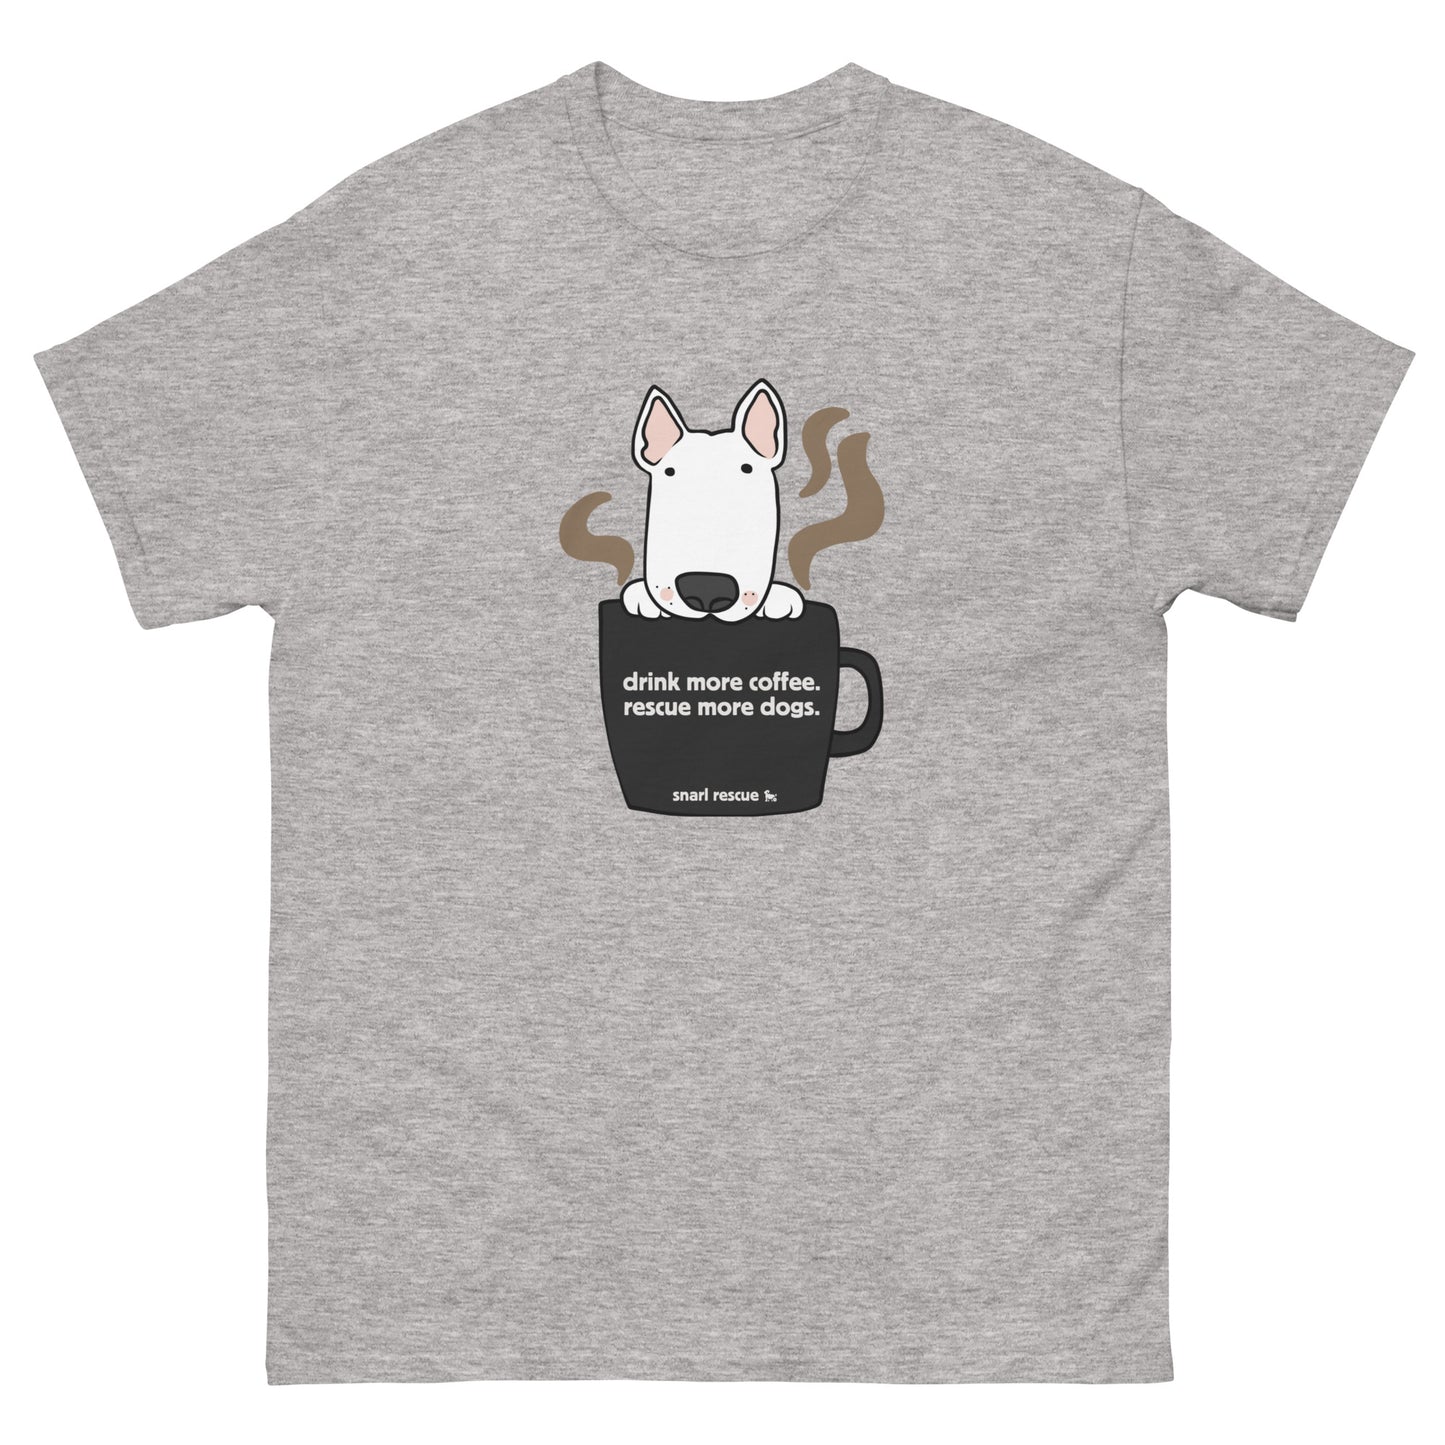 The Large Pup Cup Tee